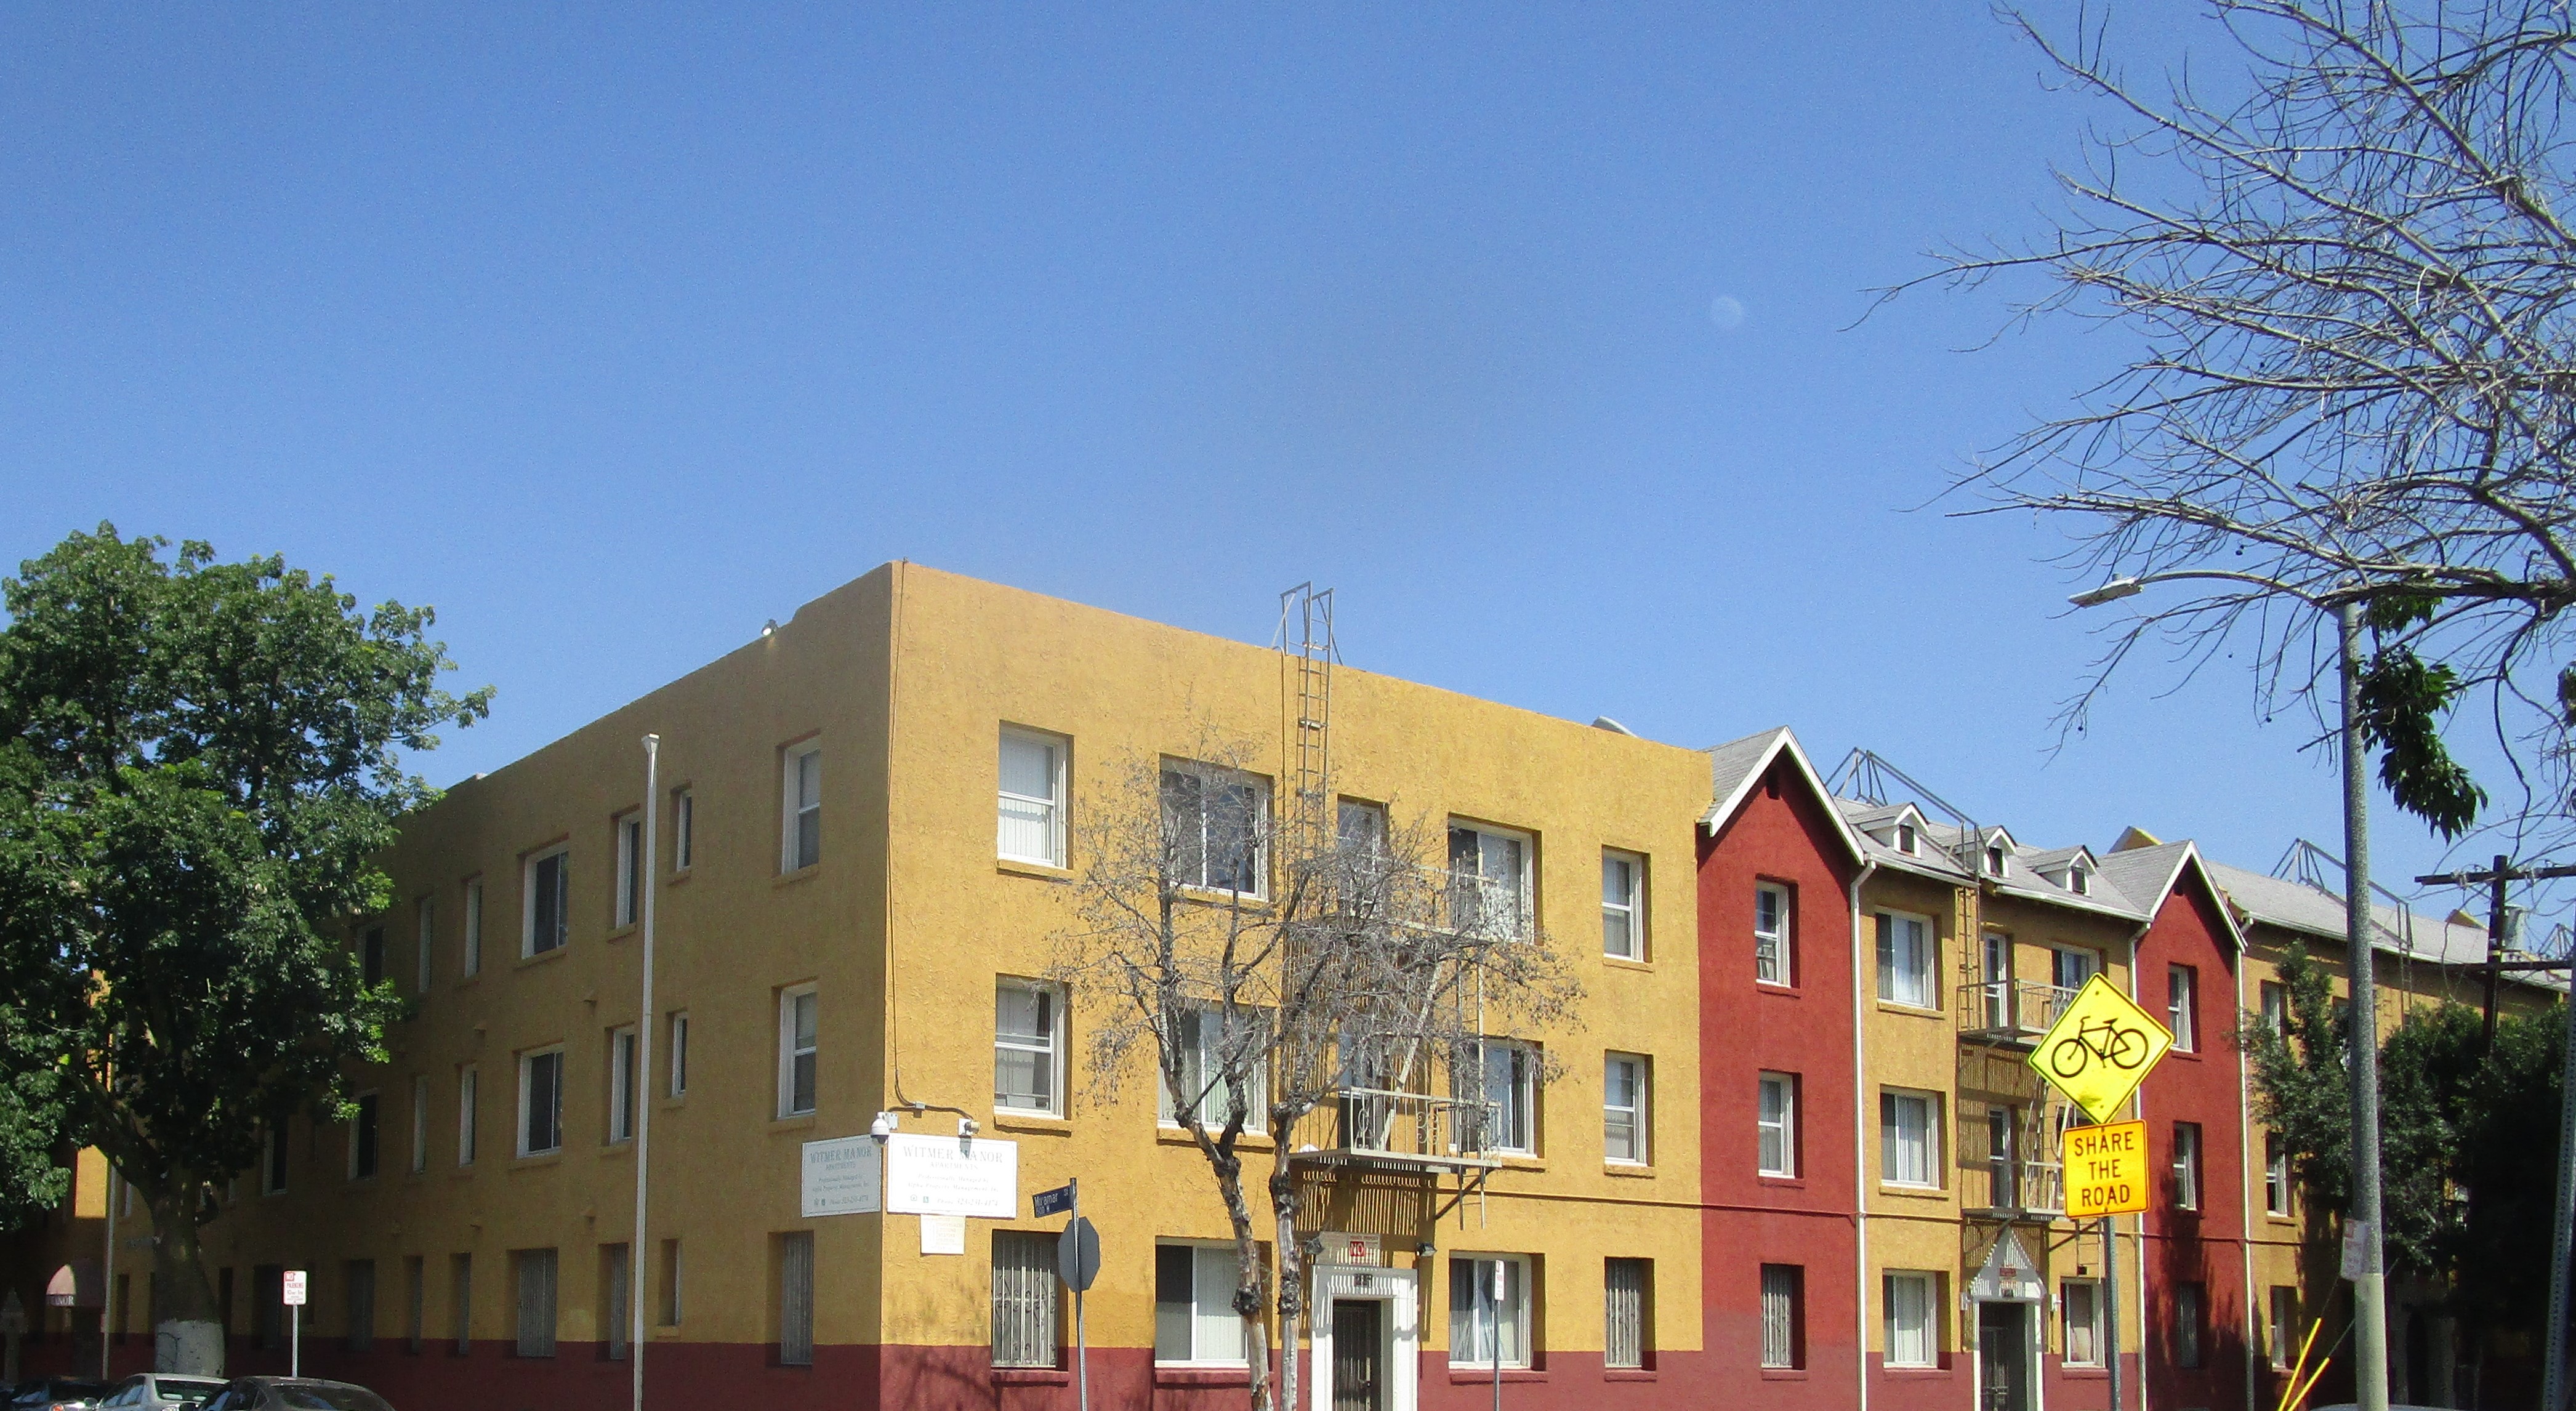 Front corner view of a four story yellow and red building. There are two fire escapes in the front of the building.